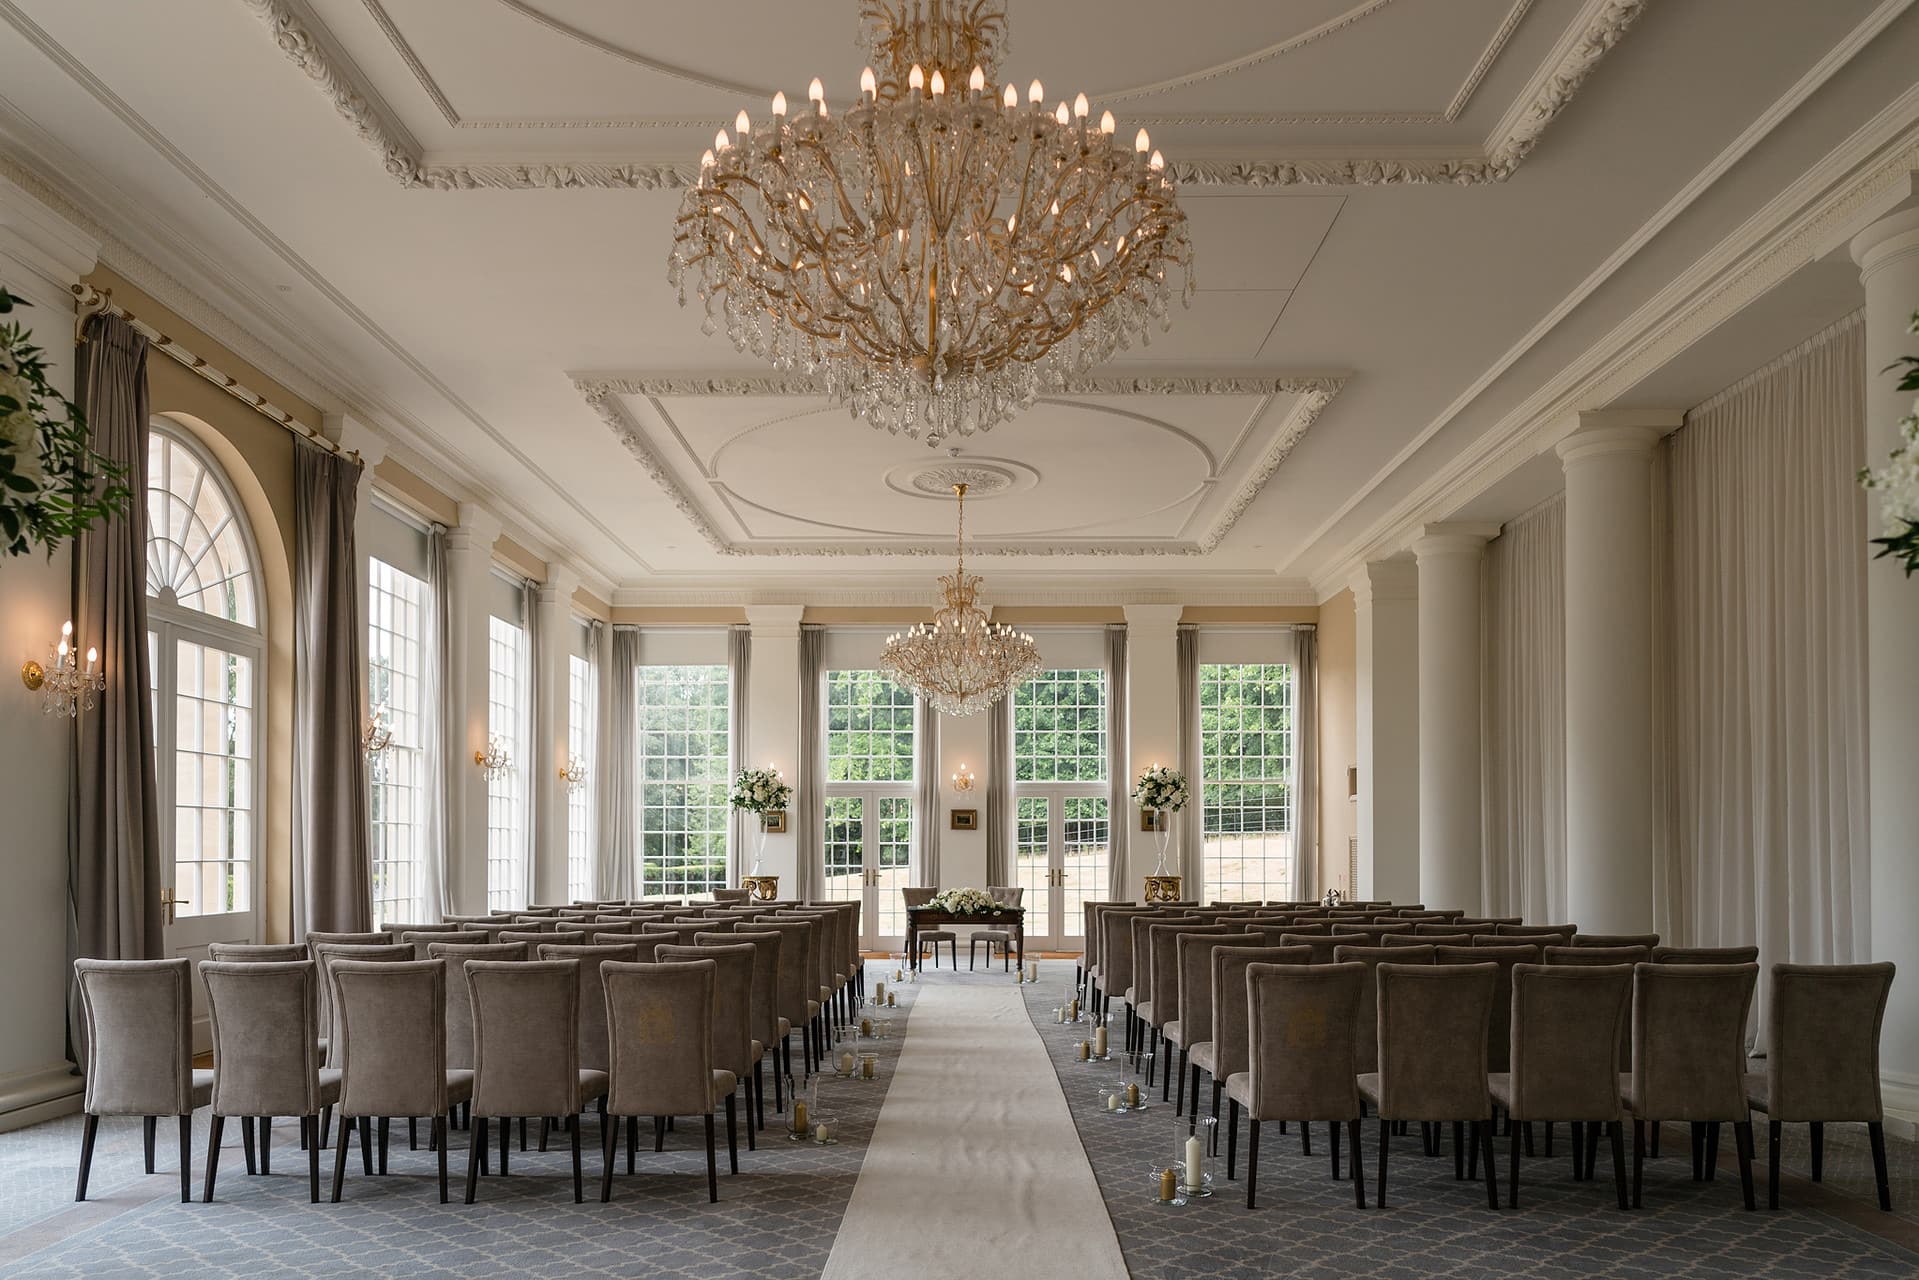 Orangery with large chandeliers set for a wedding